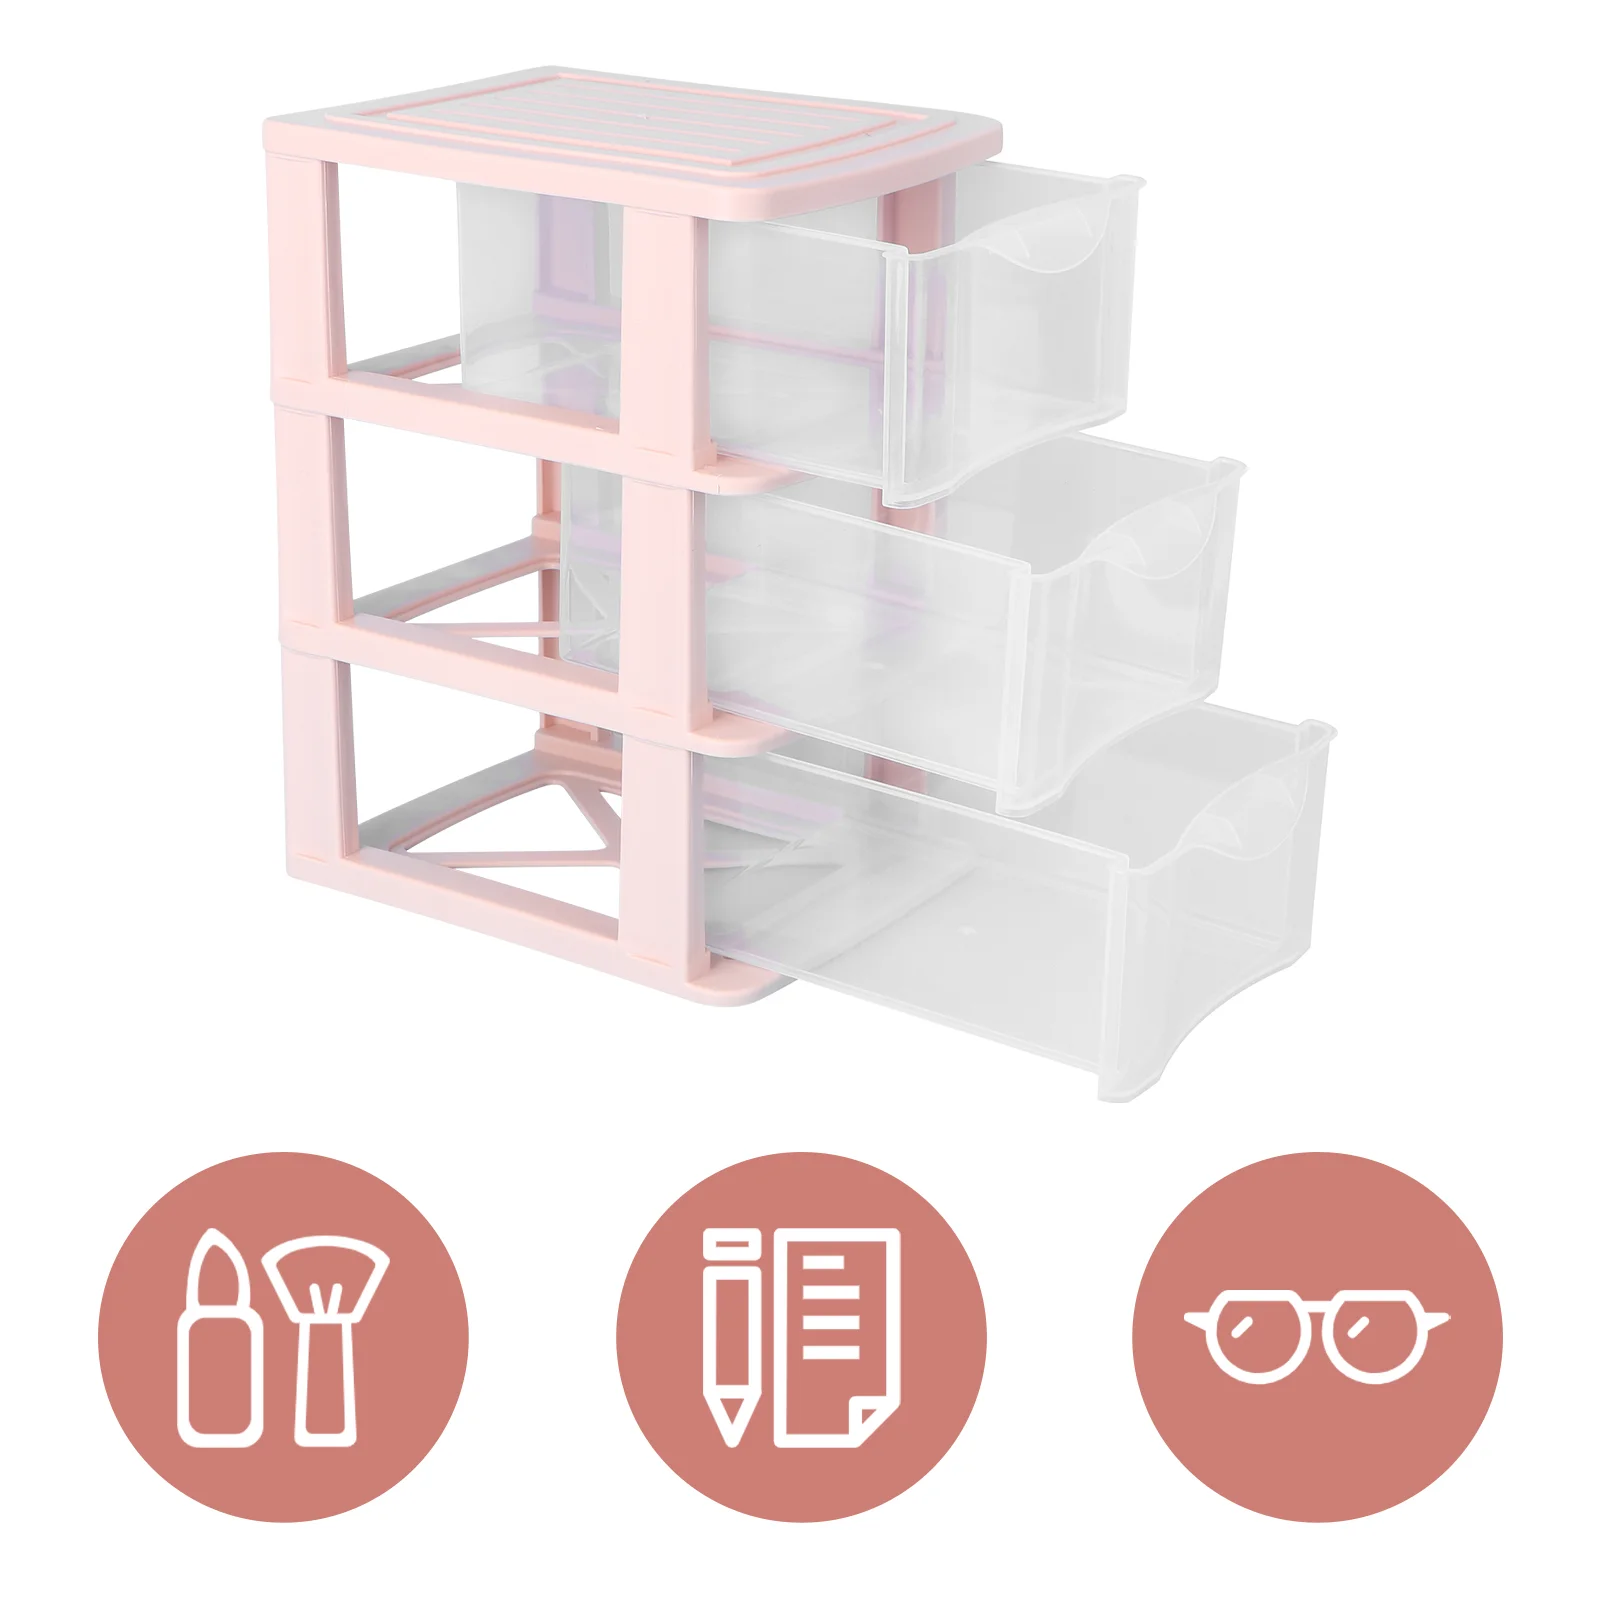 

Storage Drawer Organizer Drawers Desktop Plastic Box Cabinet Makeup Desk Office Case Unit Sundries Holder Container Containers